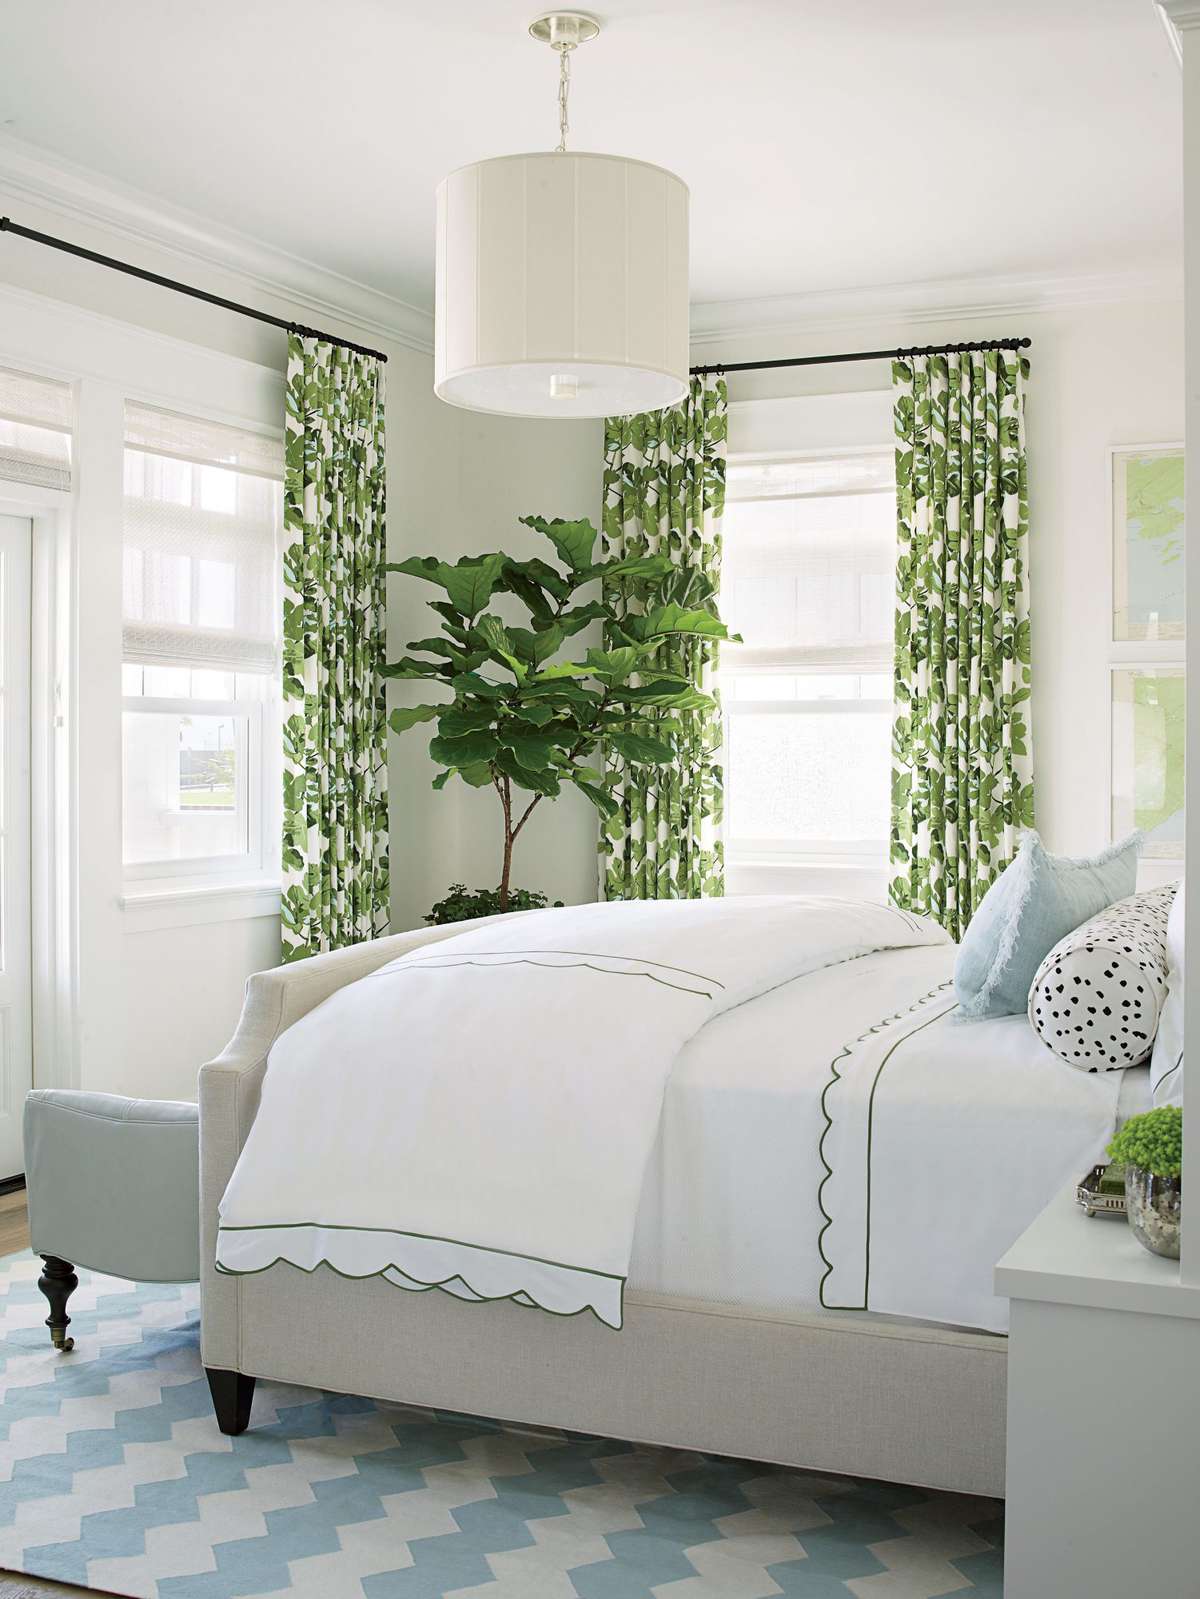 The color scheme of our Coronado Showhouse master bedroom is inspired by the green fig leaf-patterned drapes, which have robin’s egg blue accents that are repeated in the chevron dhurrie rug, leather settee, and fringed accent pillow.